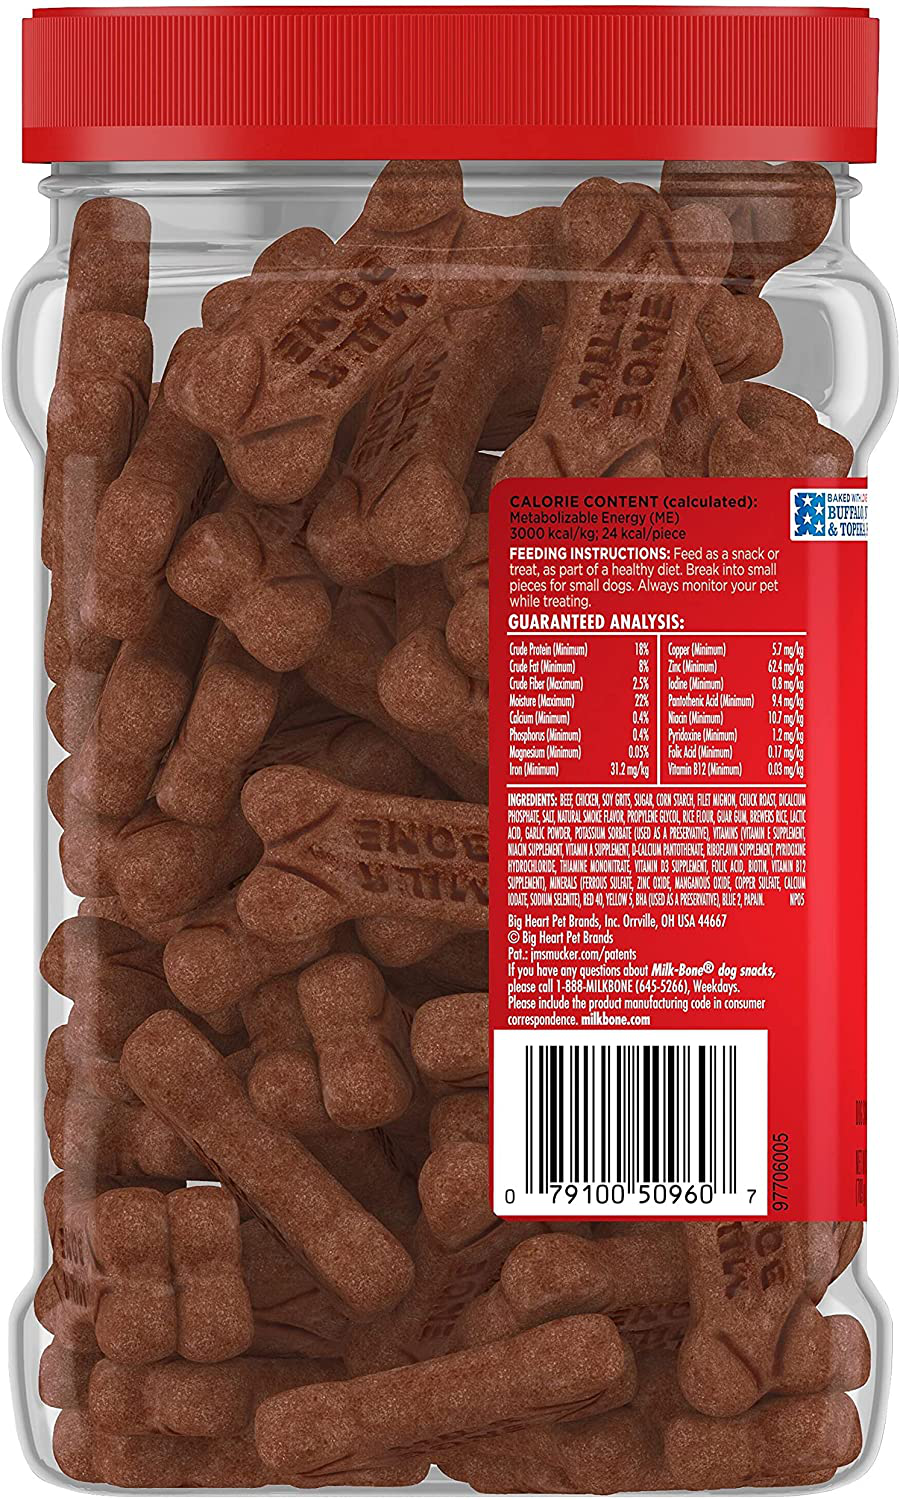 Milk-Bone Soft & Chewy Dog Treats with 12 Vitamins and Minerals Animals & Pet Supplies > Pet Supplies > Dog Supplies > Dog Treats Milk-Bone   